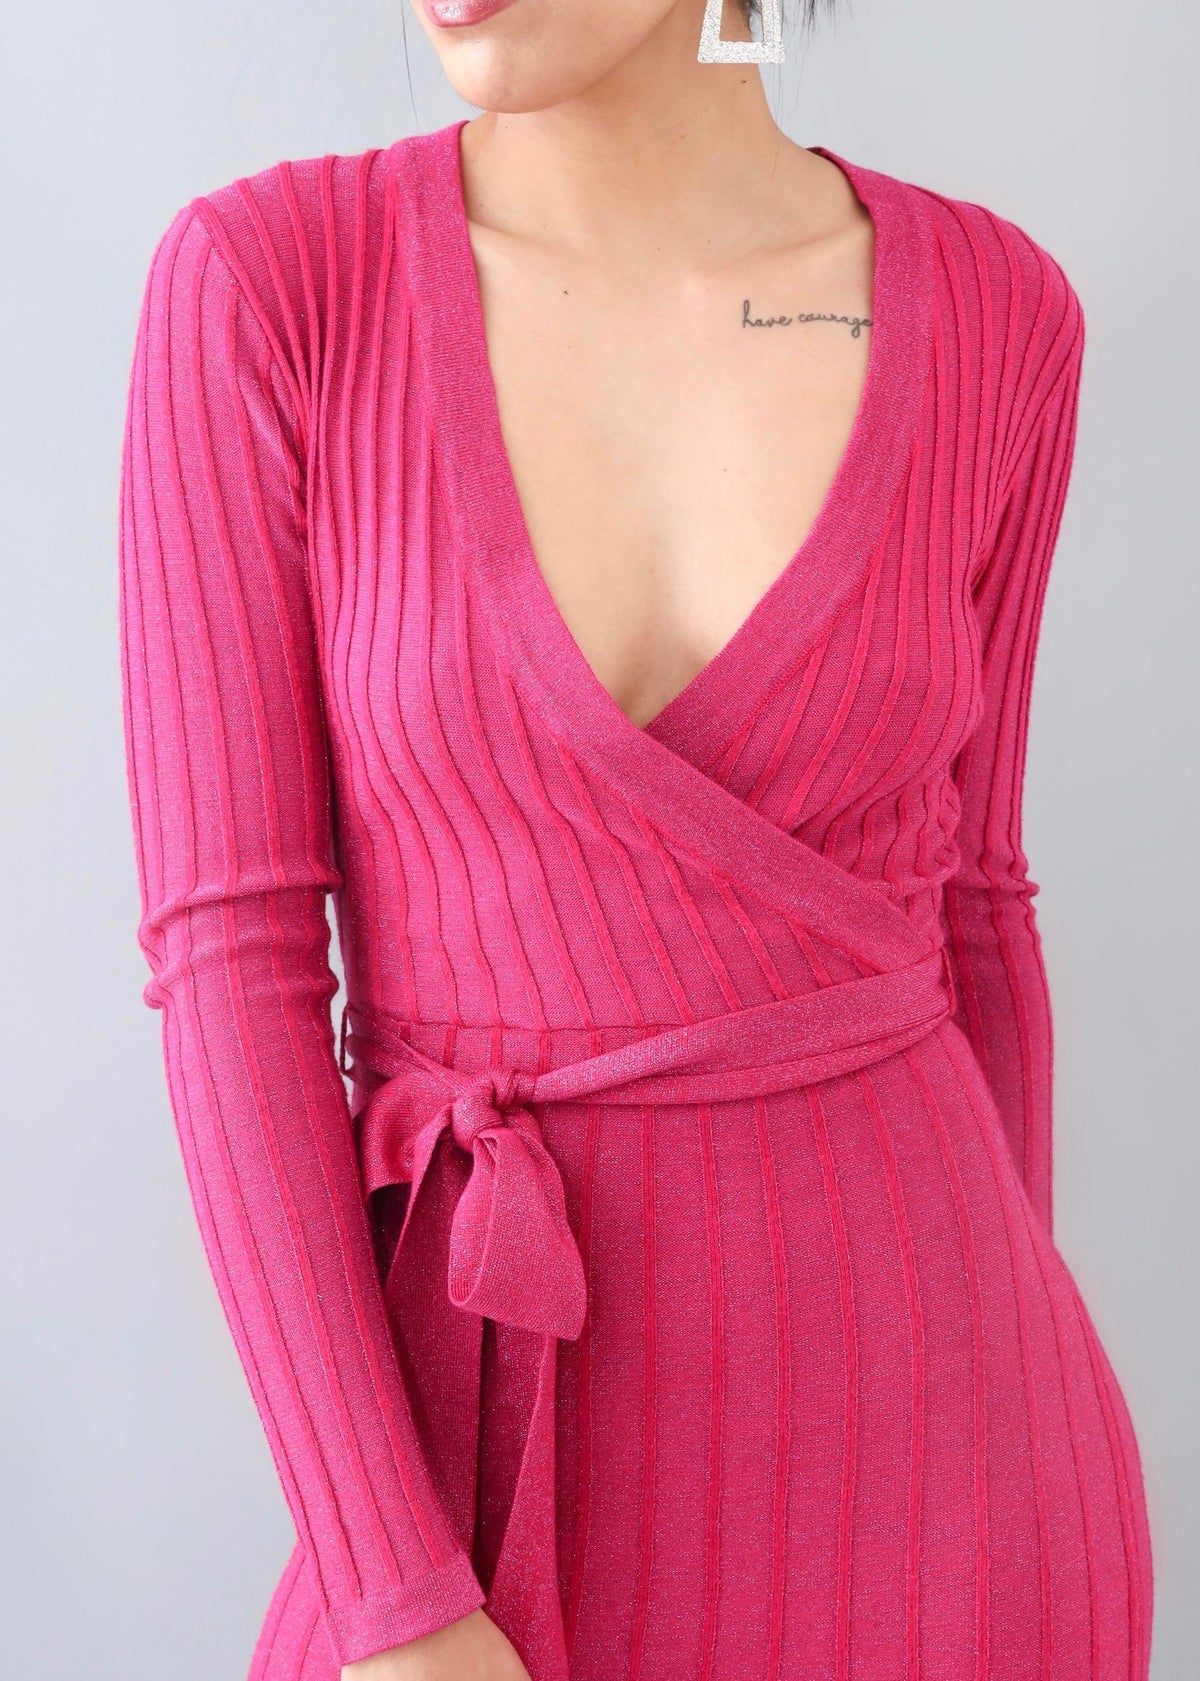 Enticing Sparkly Pink Surplice Wrap-Style Midi Party Dress